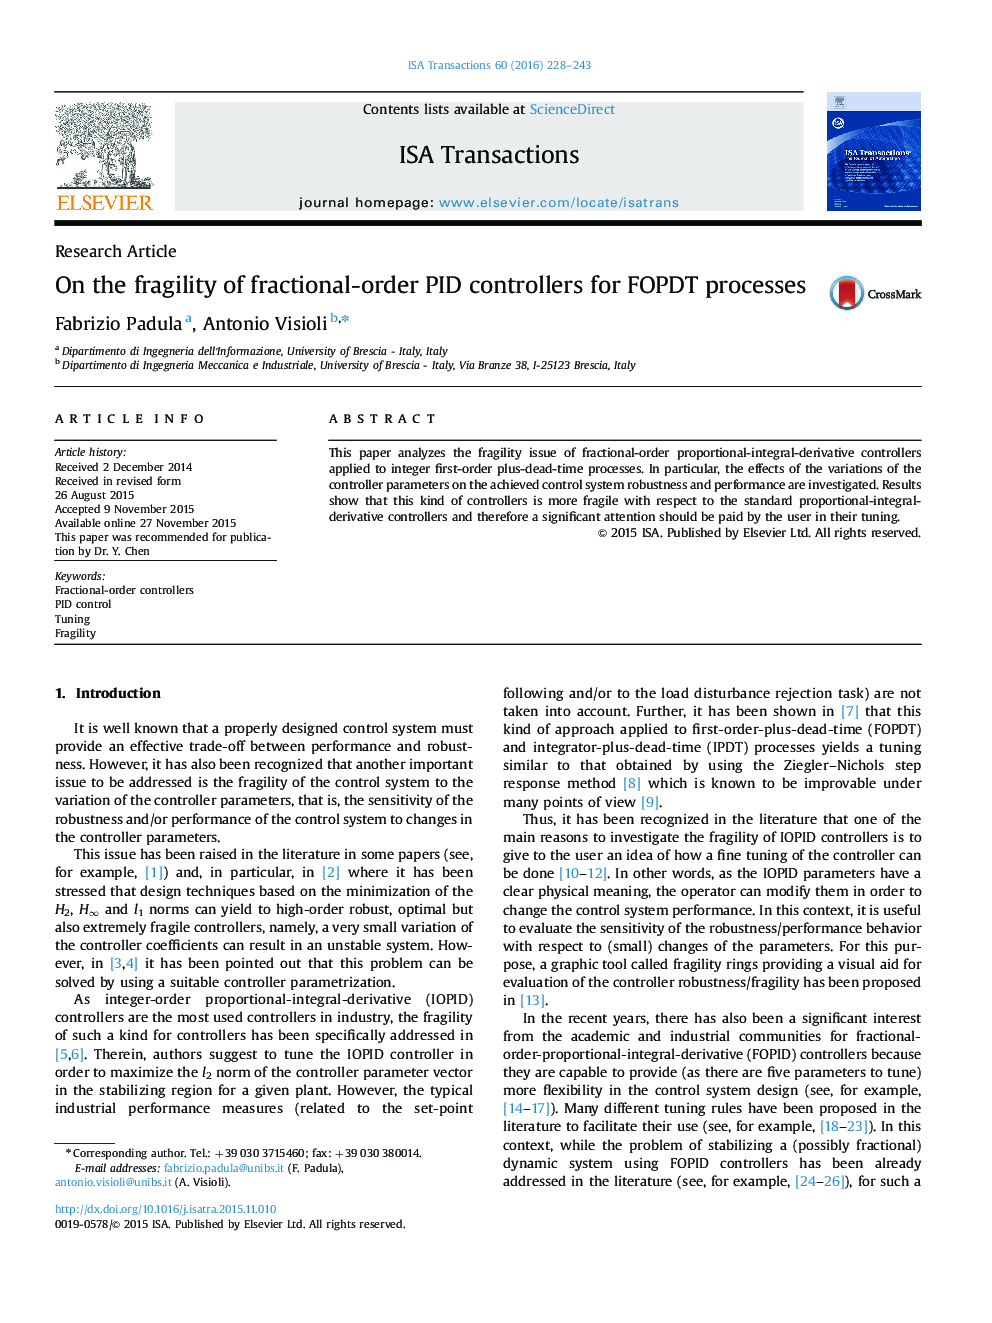 Research ArticleOn the fragility of fractional-order PID controllers for FOPDT processes